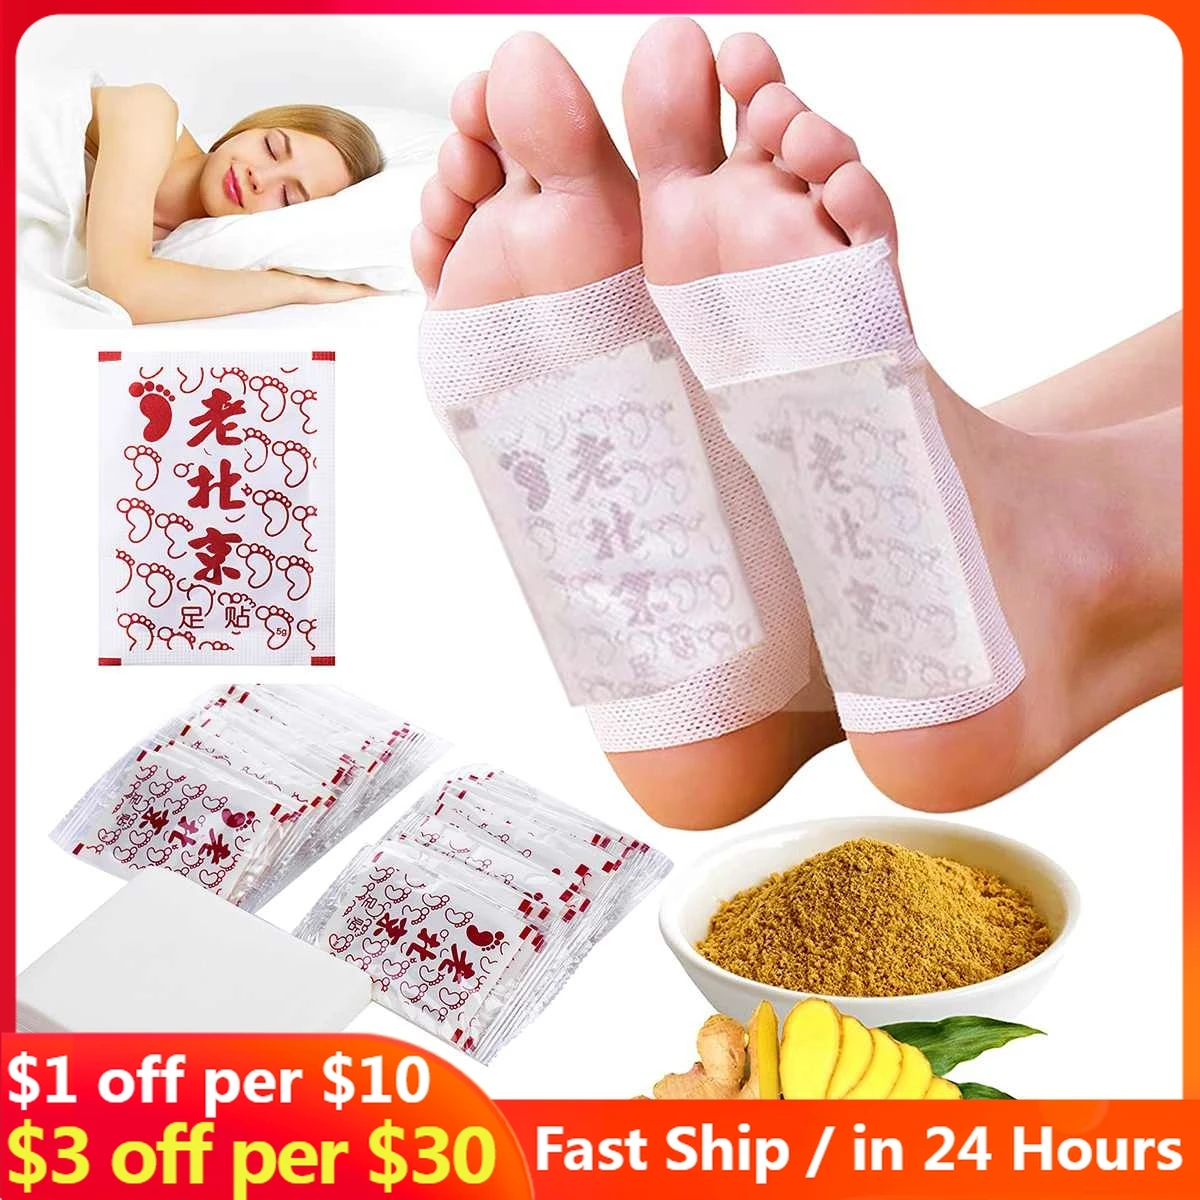 

10-30Pcs Detox Foot Patches Stickers Bamboo Vinegar Organic Herbal Cleansing Pads Slimming Weight Loss Body Health Care